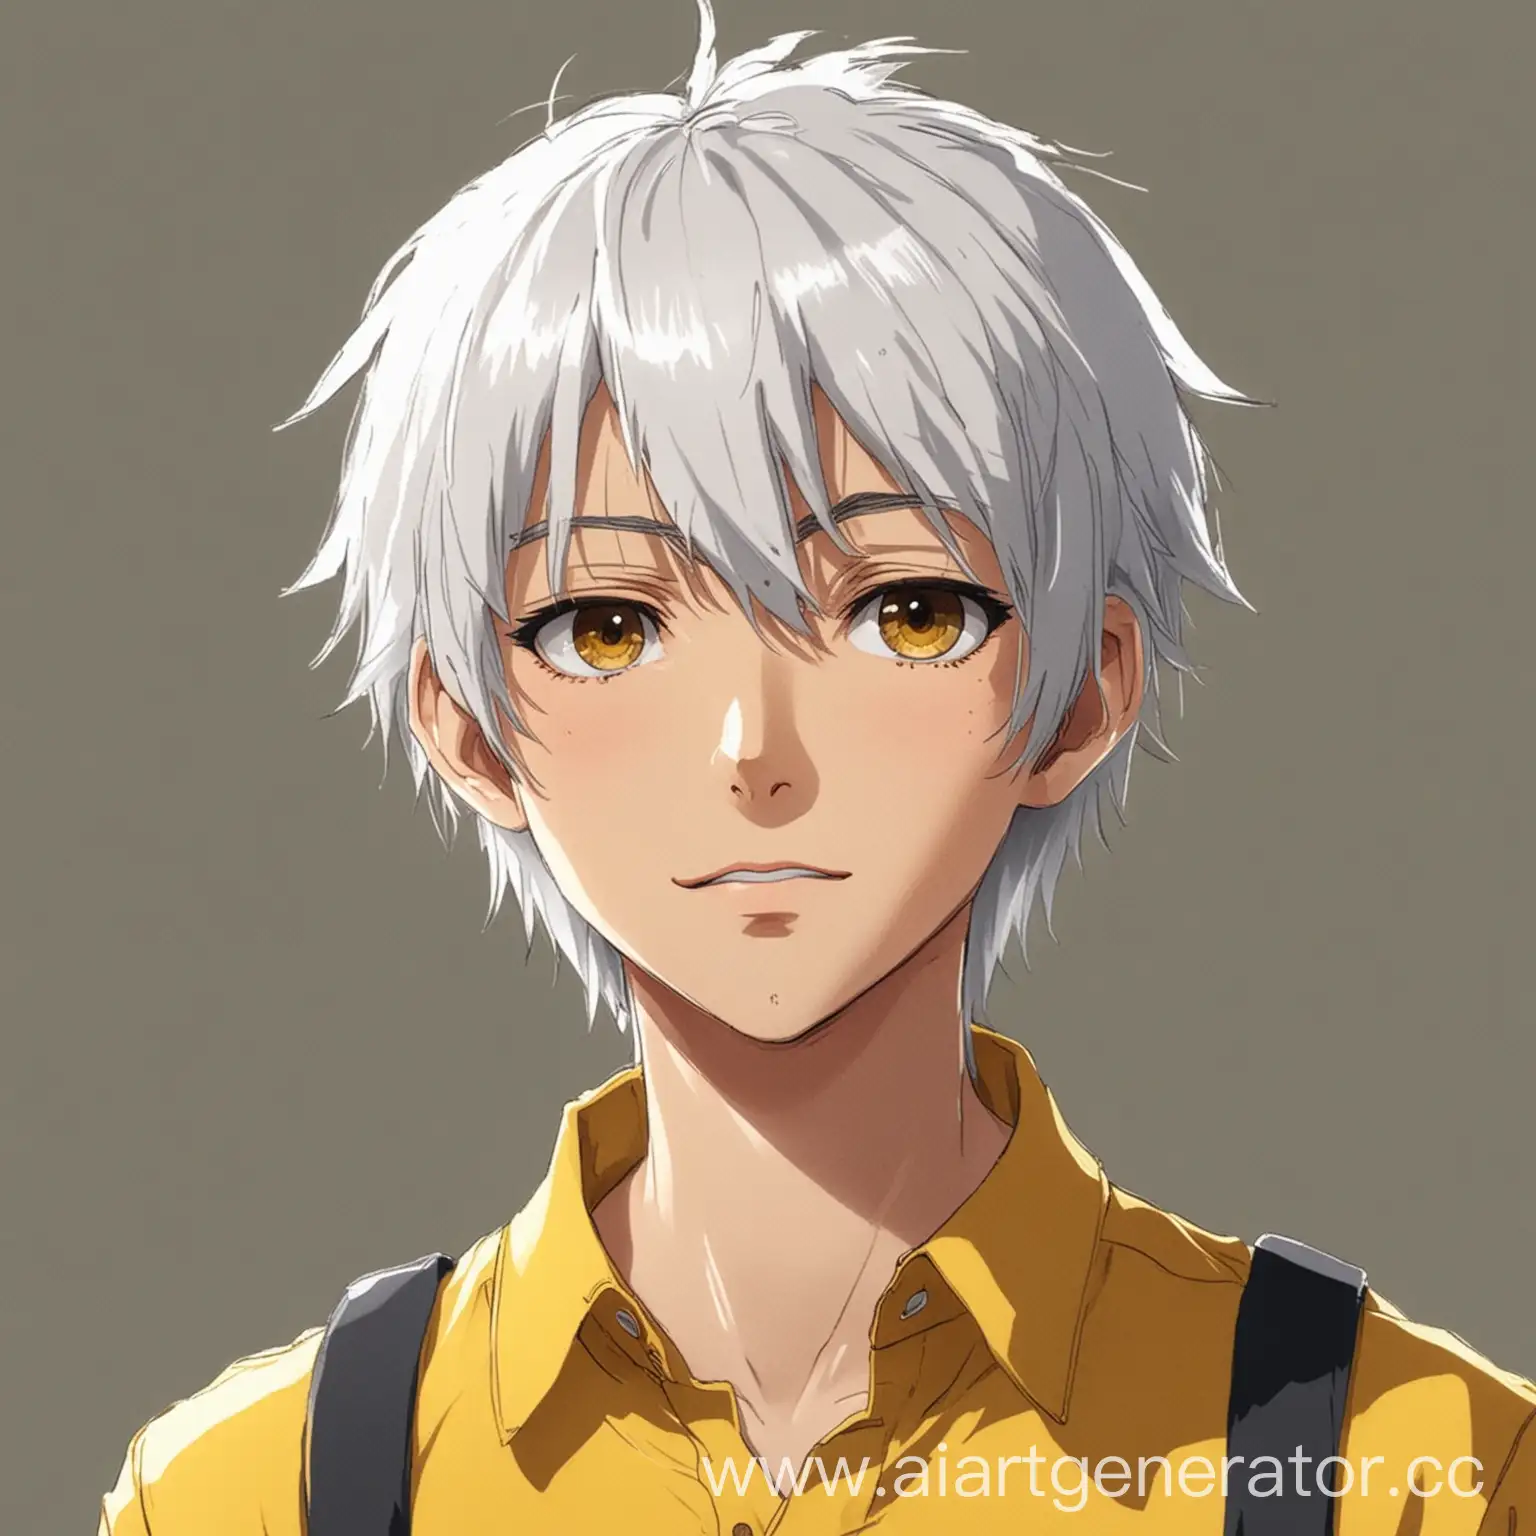 Anime-Boy-with-White-Hair-in-Yellow-Shirt